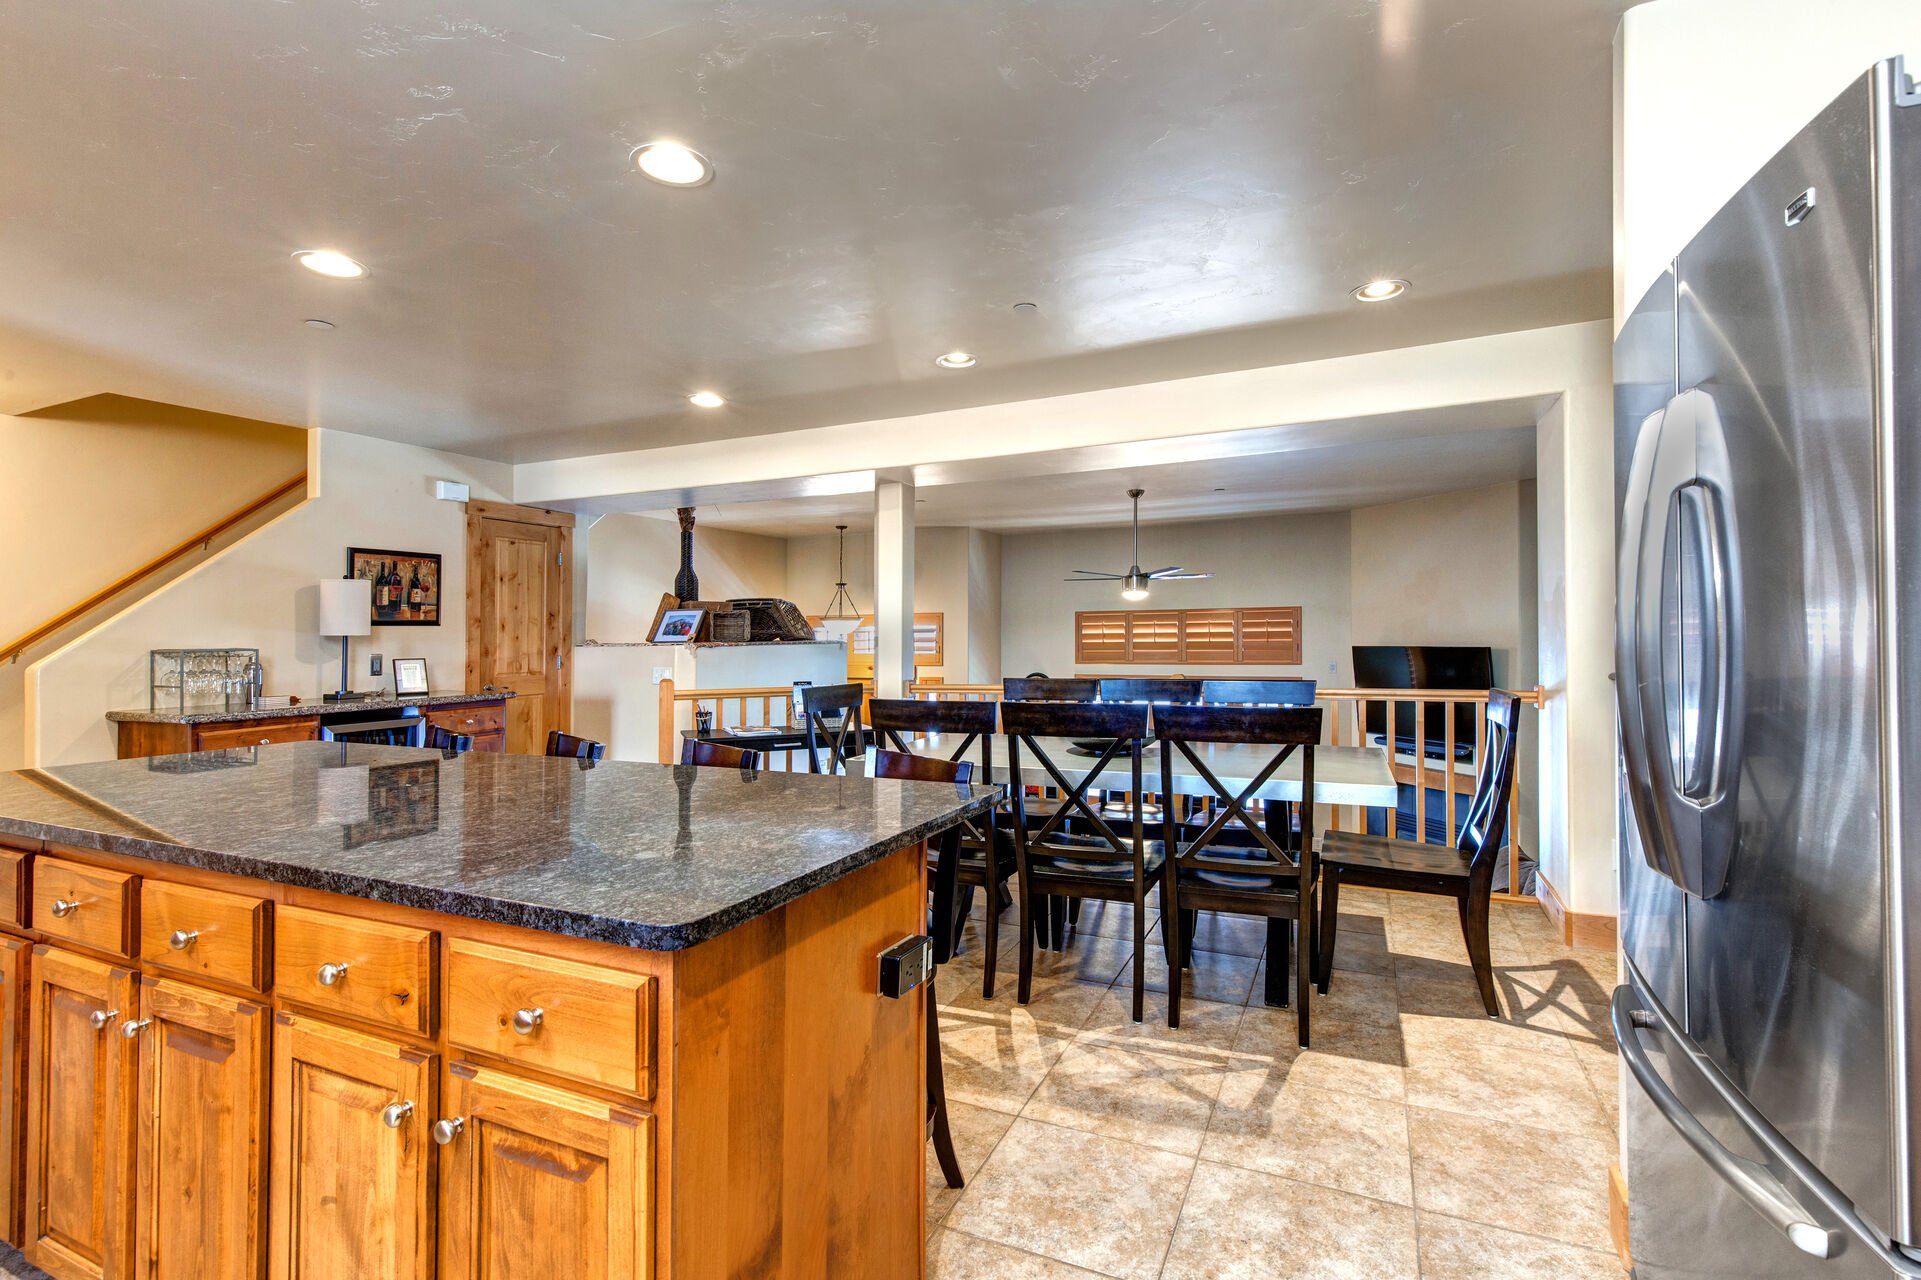 Kitchen with Stainless Steel Appliances, Ice-Maker, Wine Fridge, Stone Countertops, and Large Island with Seating for 4